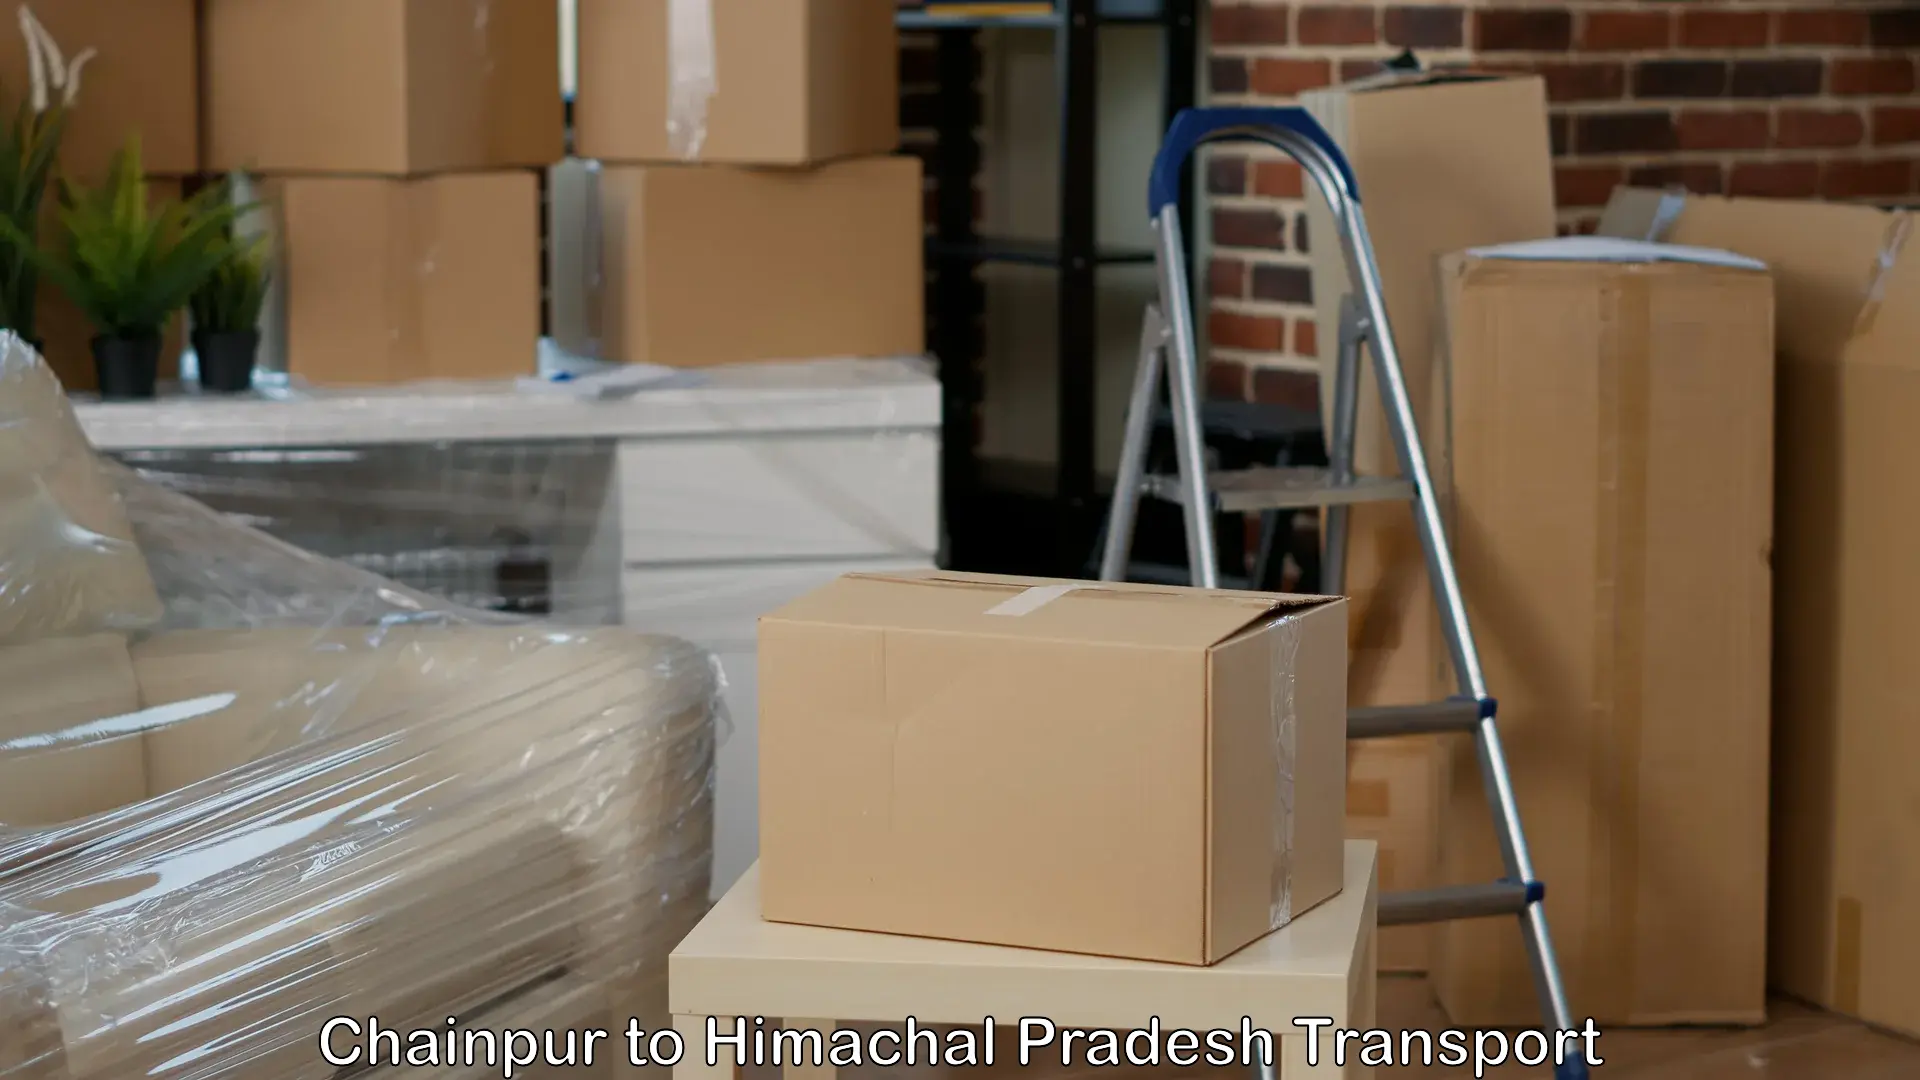 Container transport service Chainpur to Shahpur Kangra